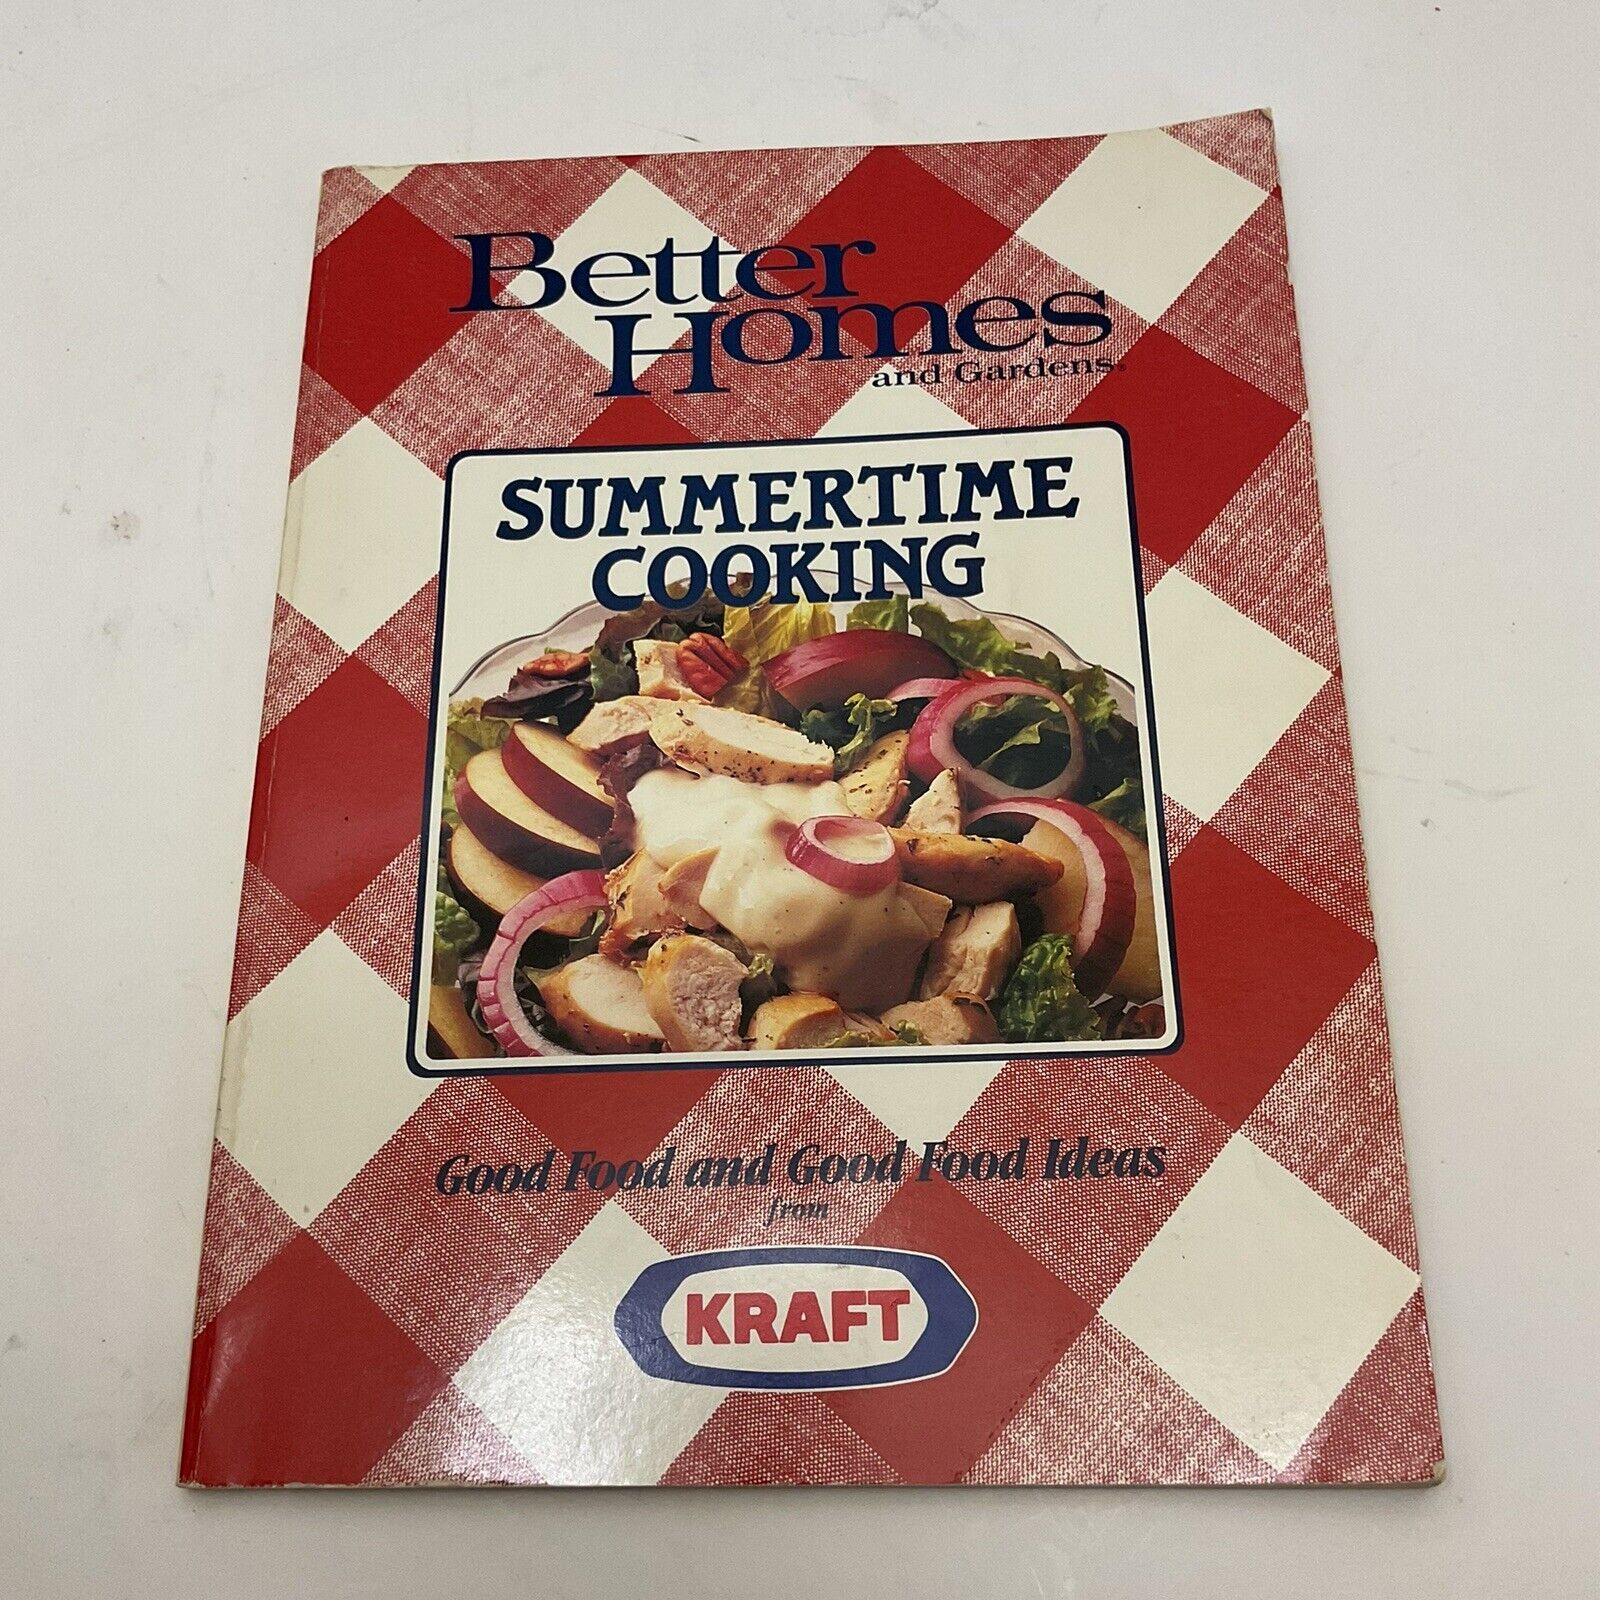 Vintage 1990s Better Home And Gardens Summertime Cooking Recipe Book Cookbook 